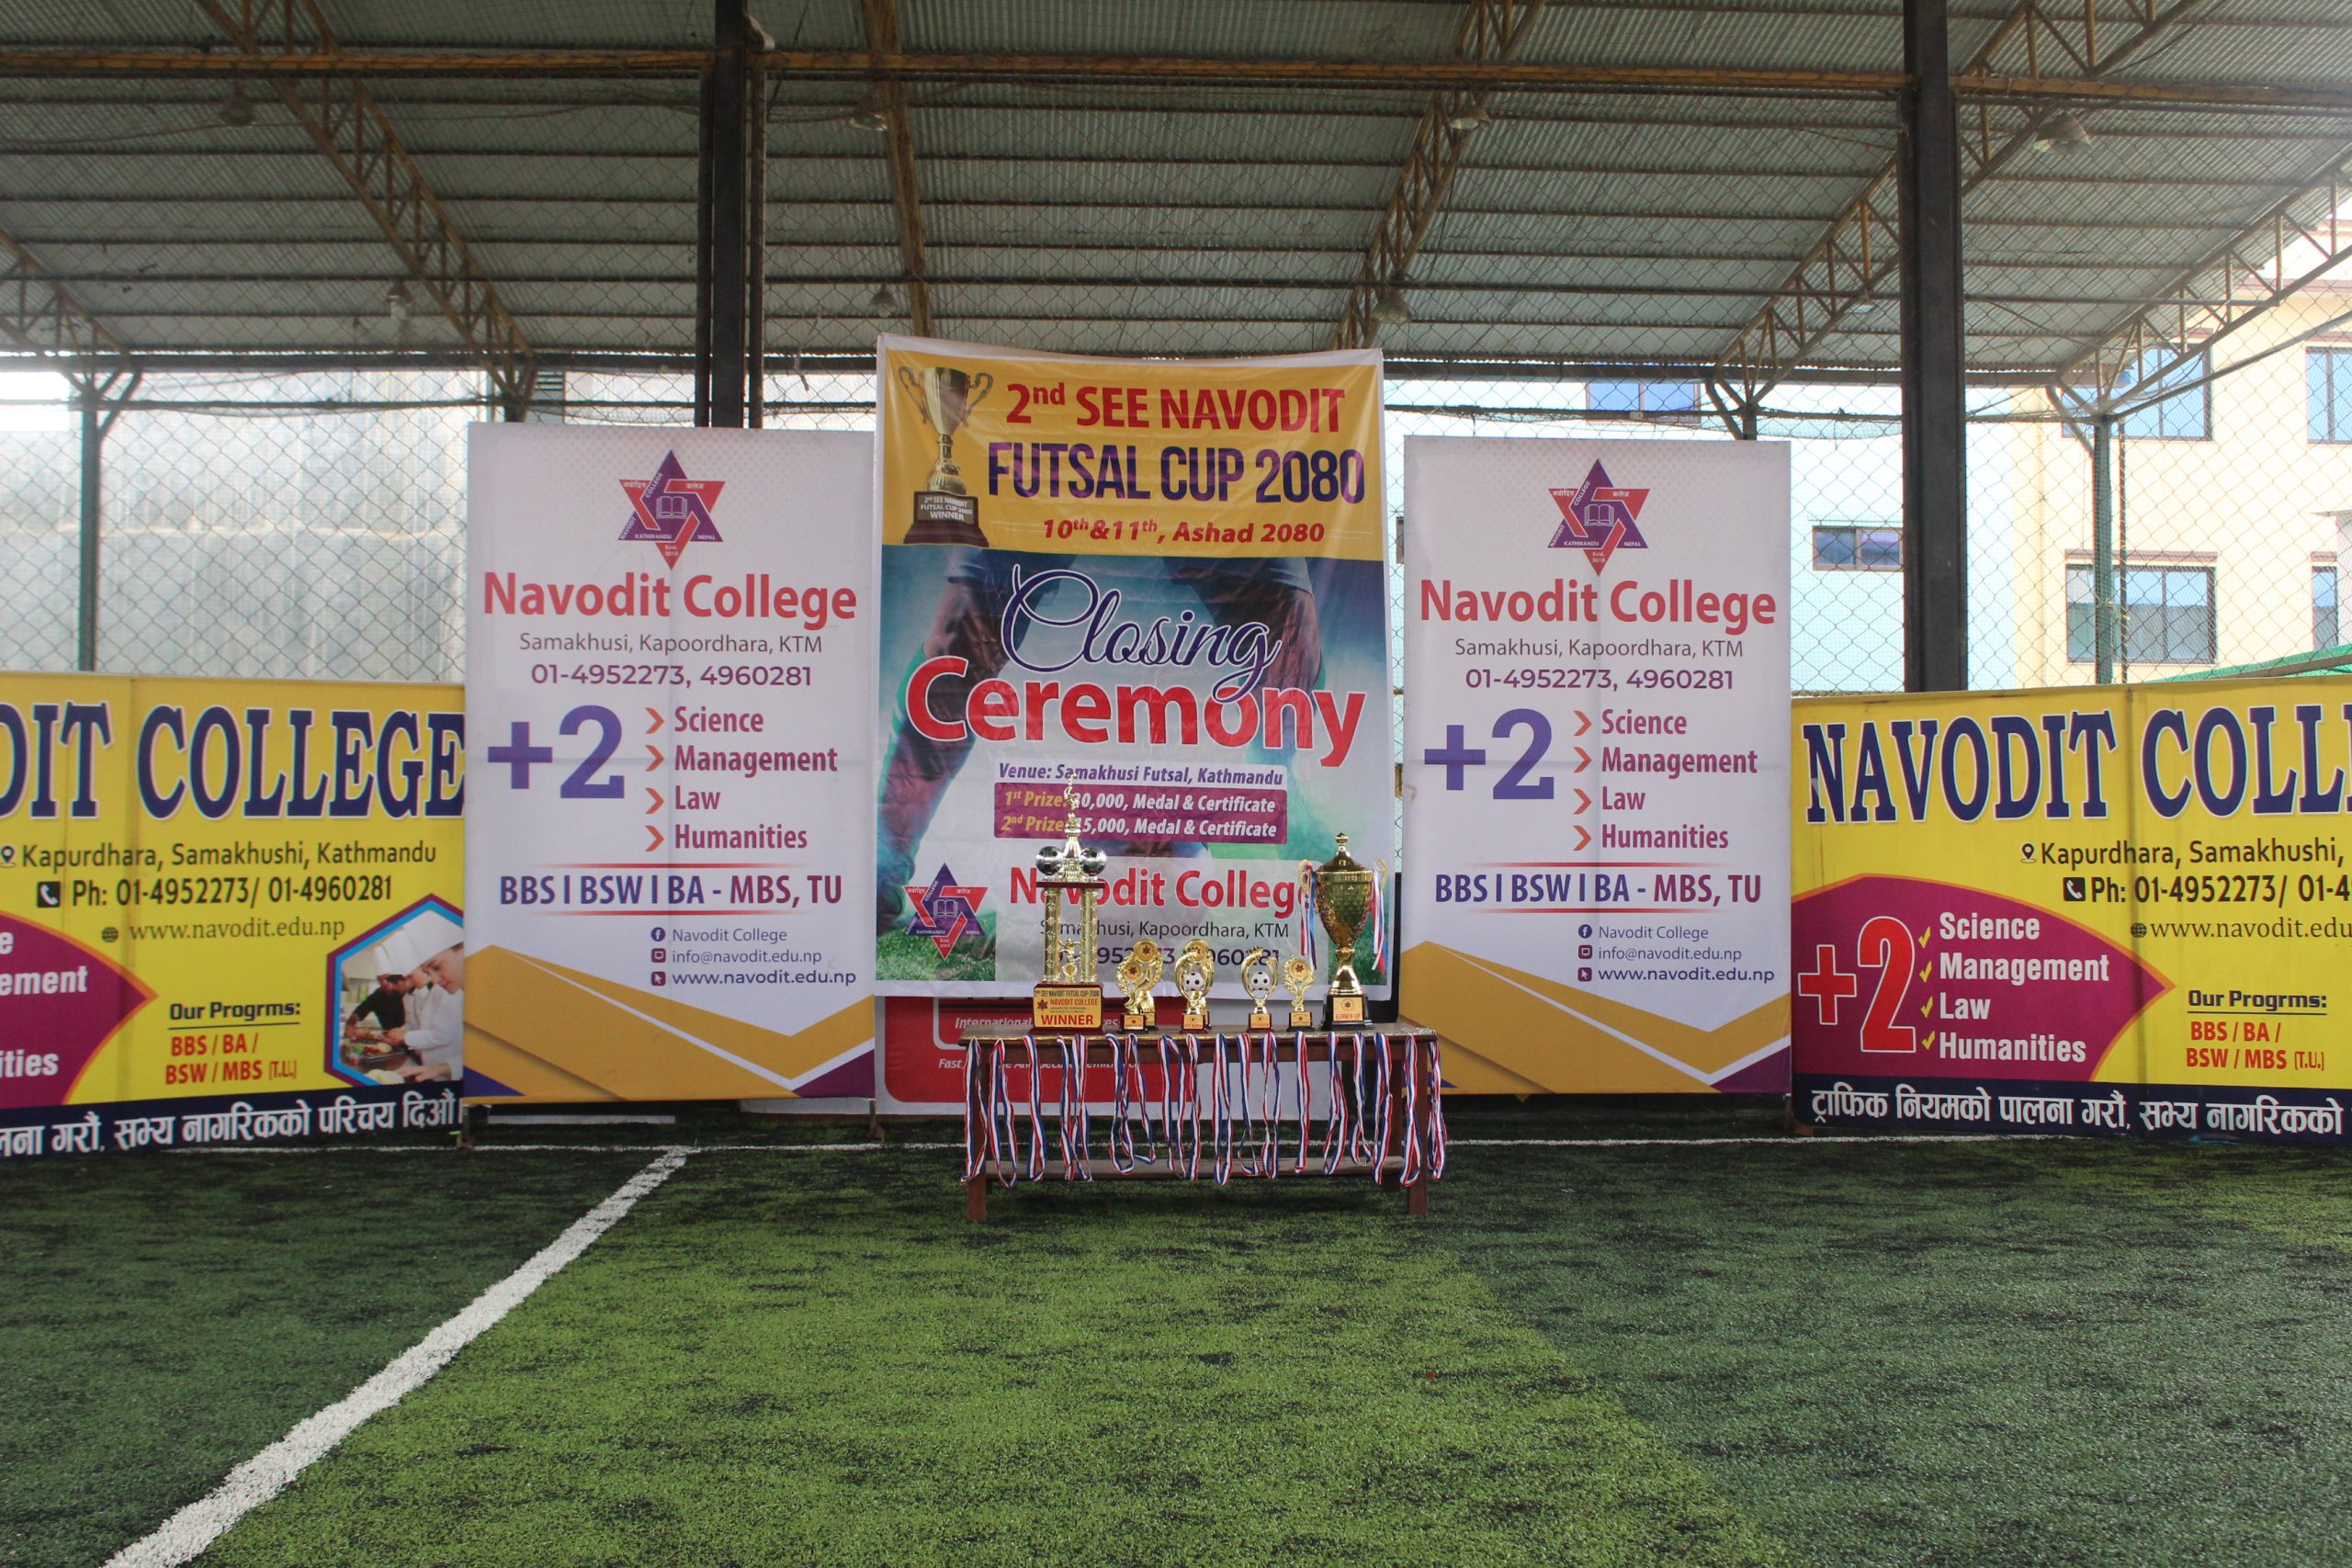 2nd Navodit SEE Futsal Cup-2080